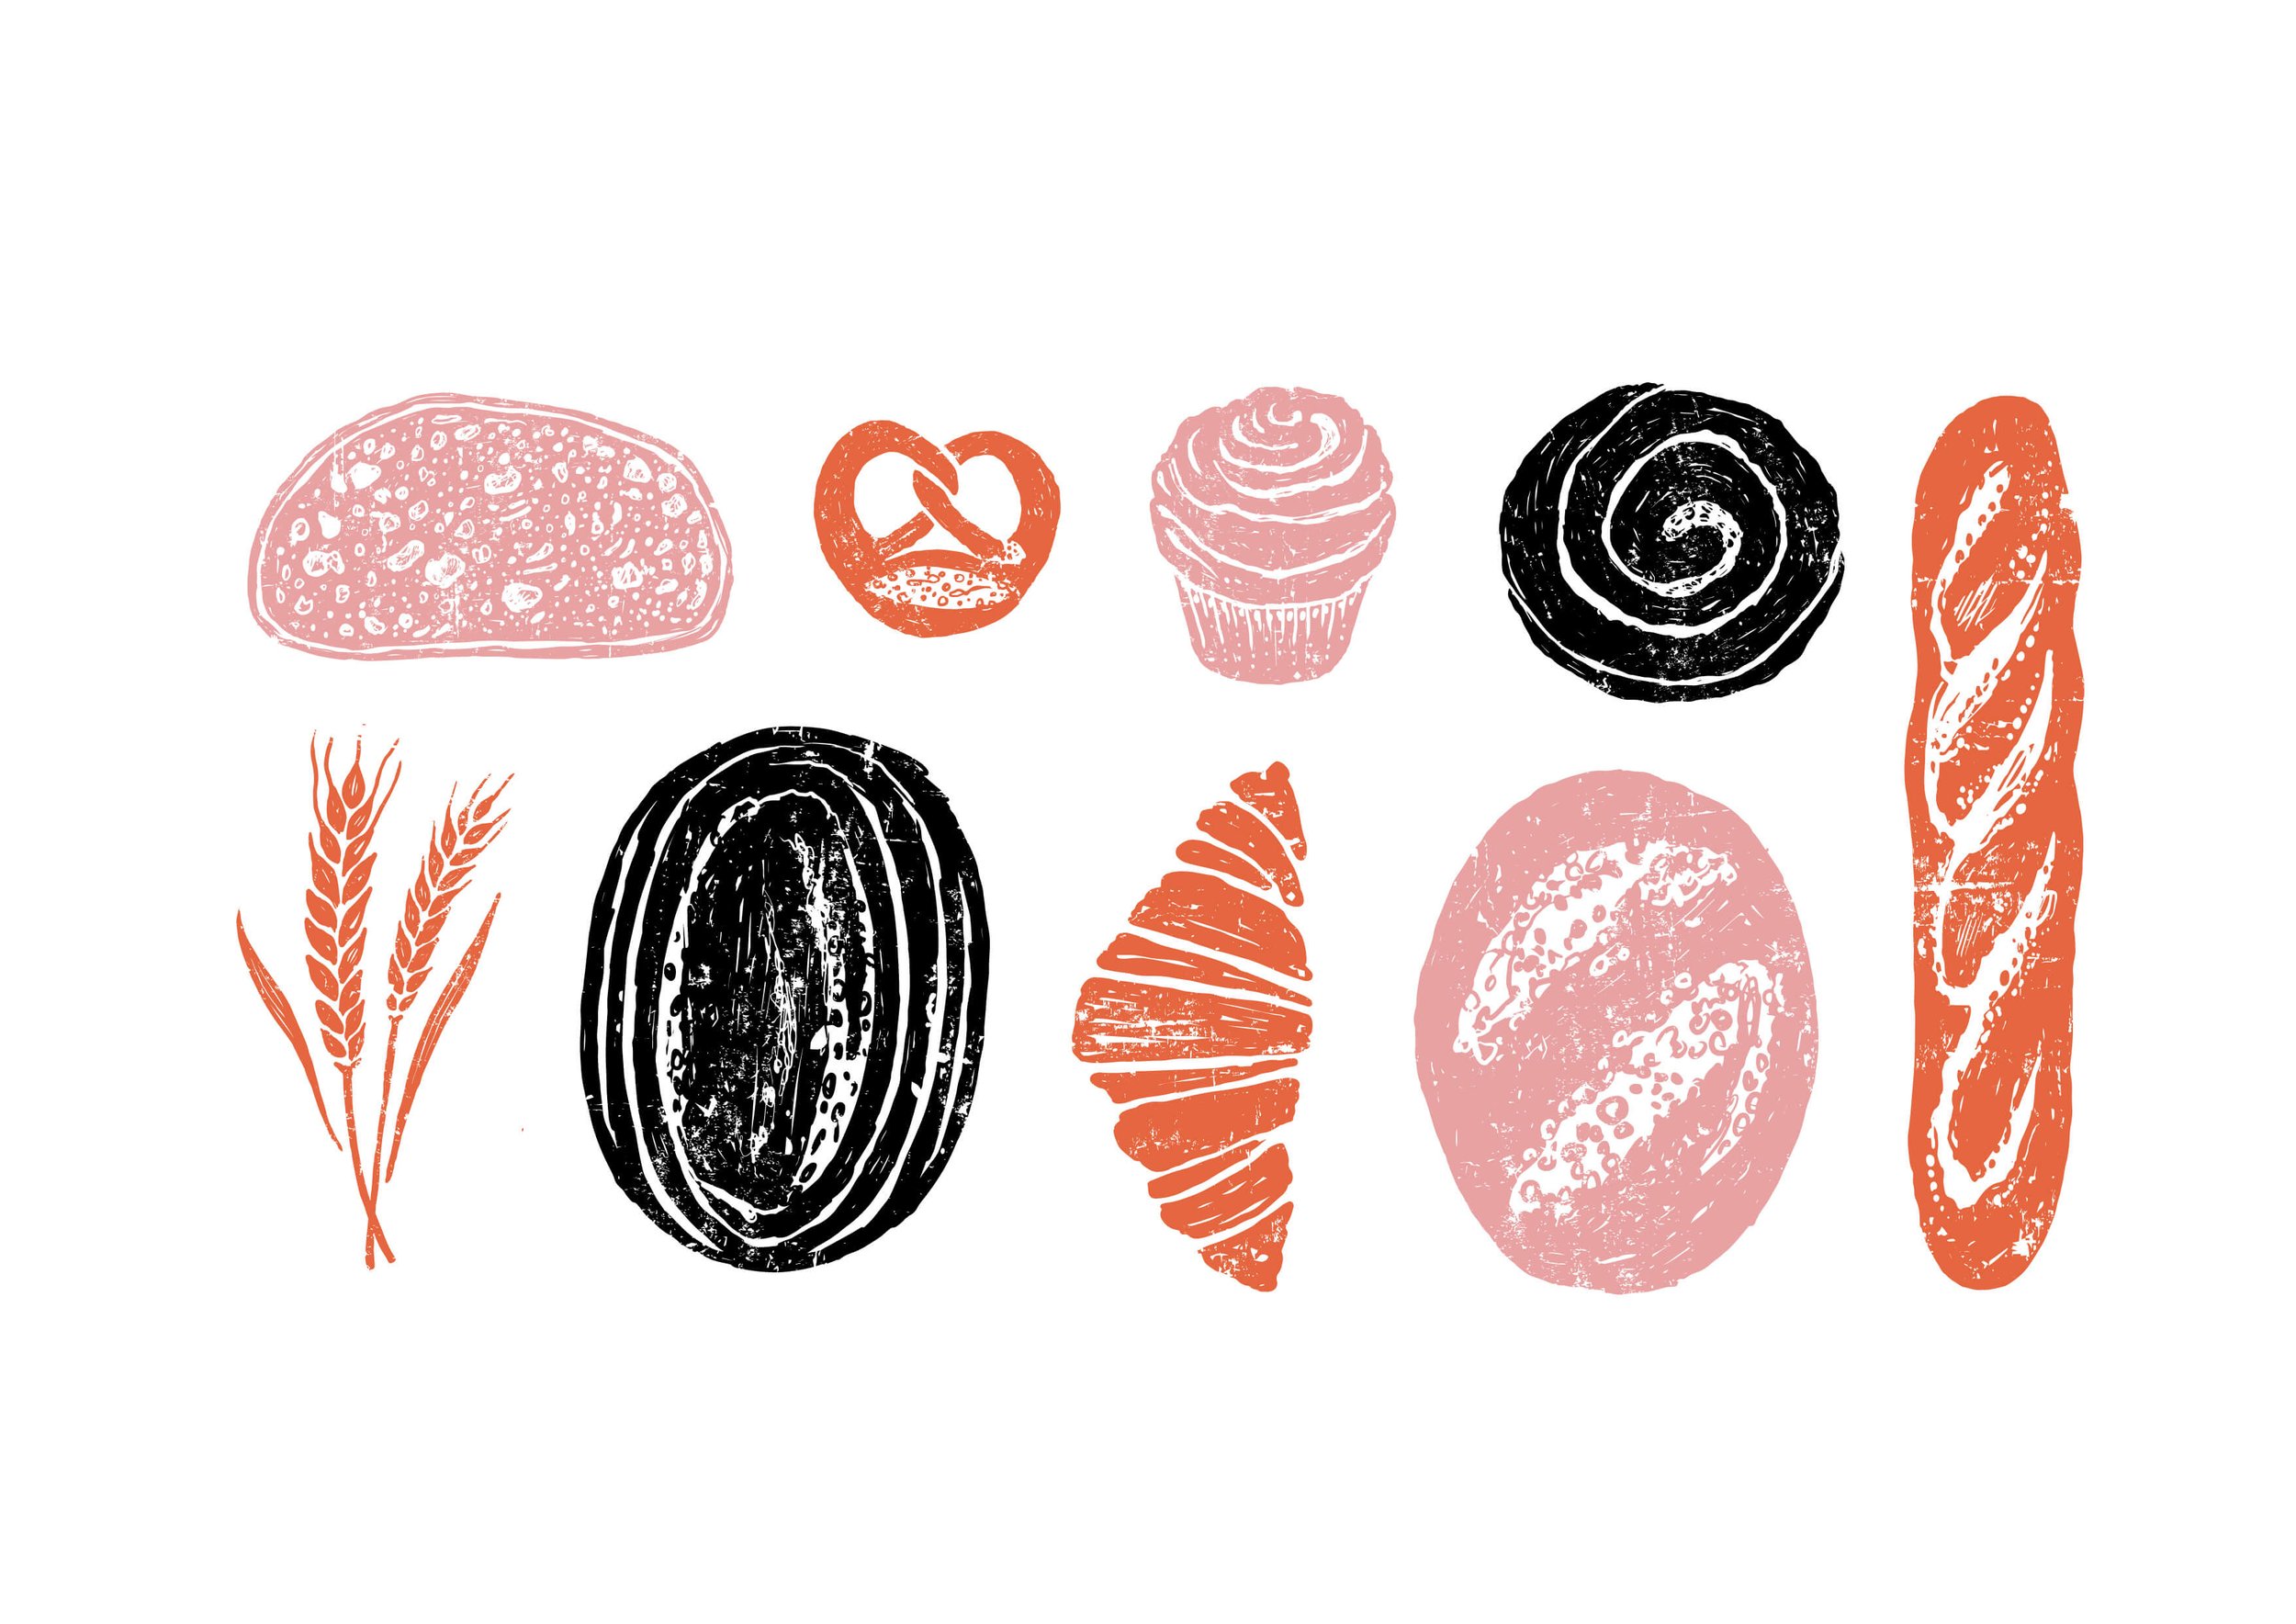  Individual spot illustrations of bread and bakes with a hand printed feel. The illustrations are in pink, orange and black. 